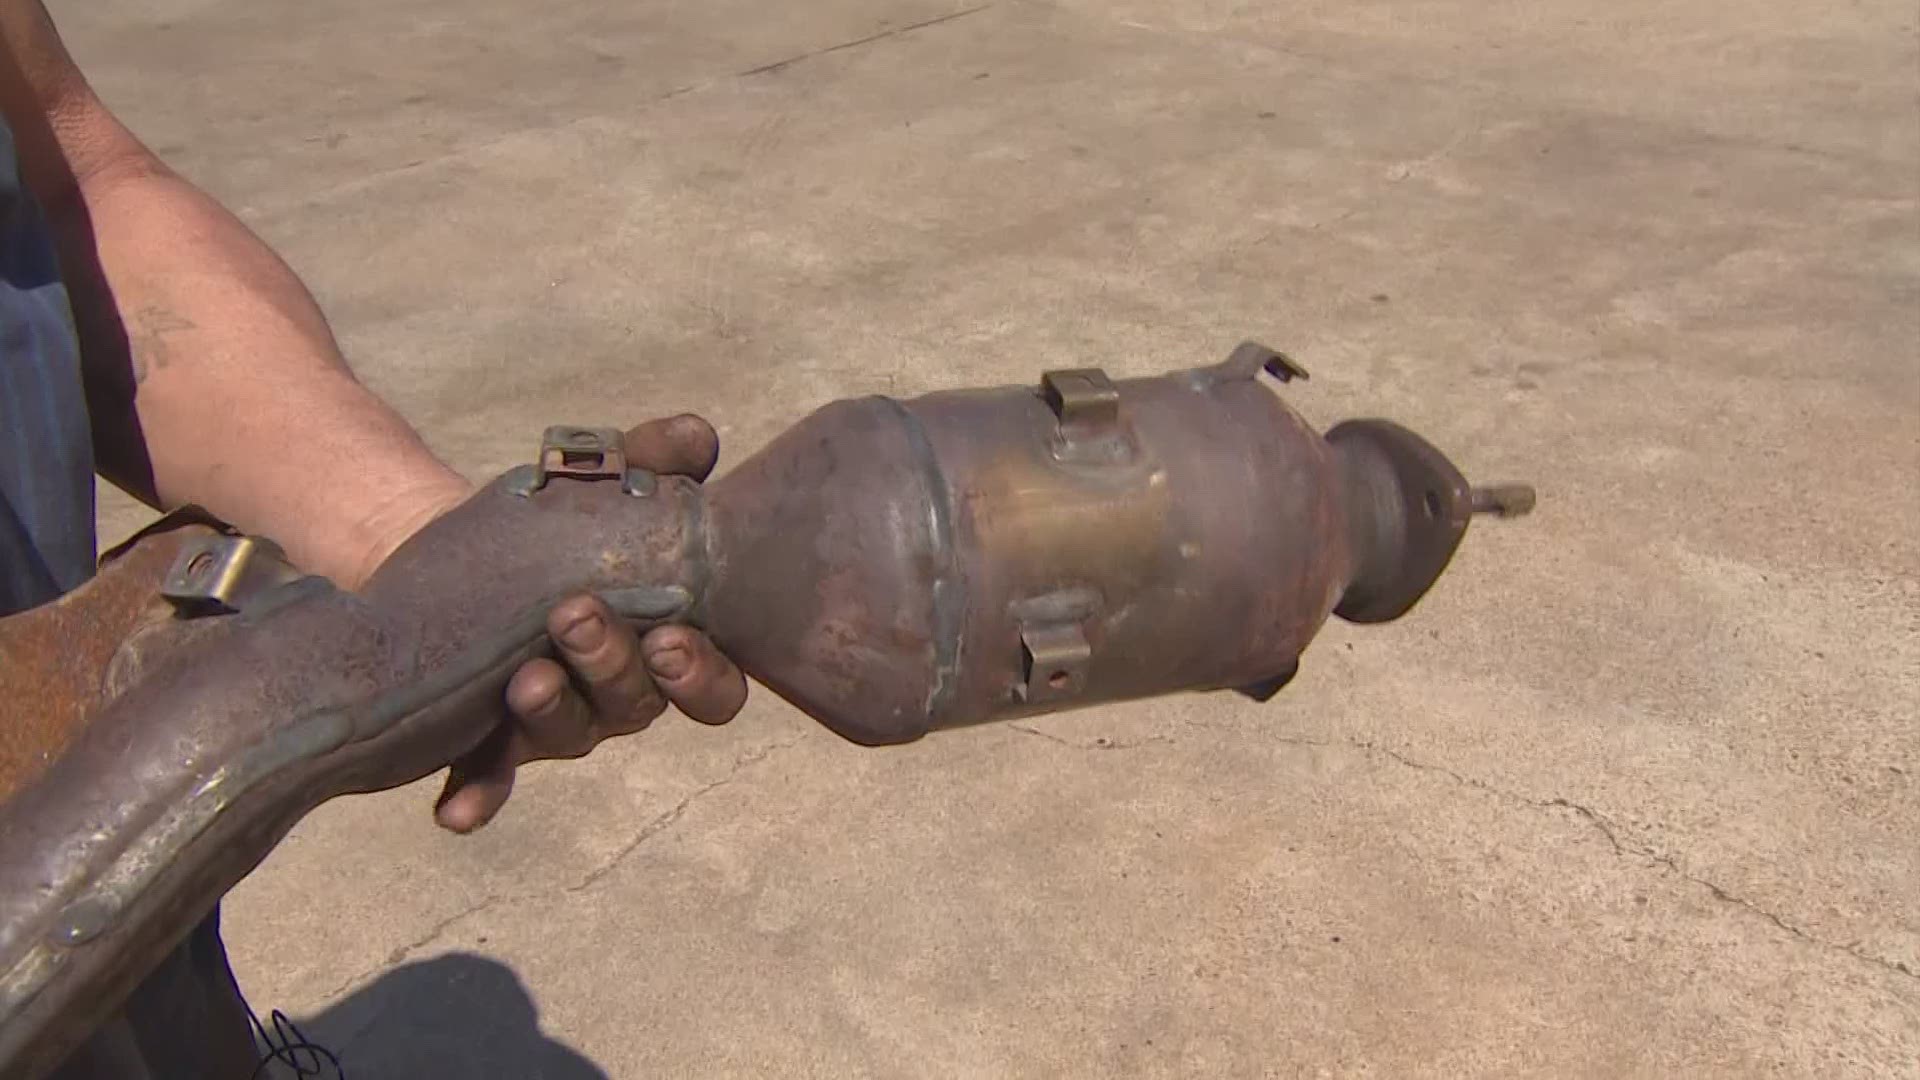 Harris County Sheriff's Office deputies said they found 32 stolen catalytic converters in a vehicle after they arrested four suspects during a chase.